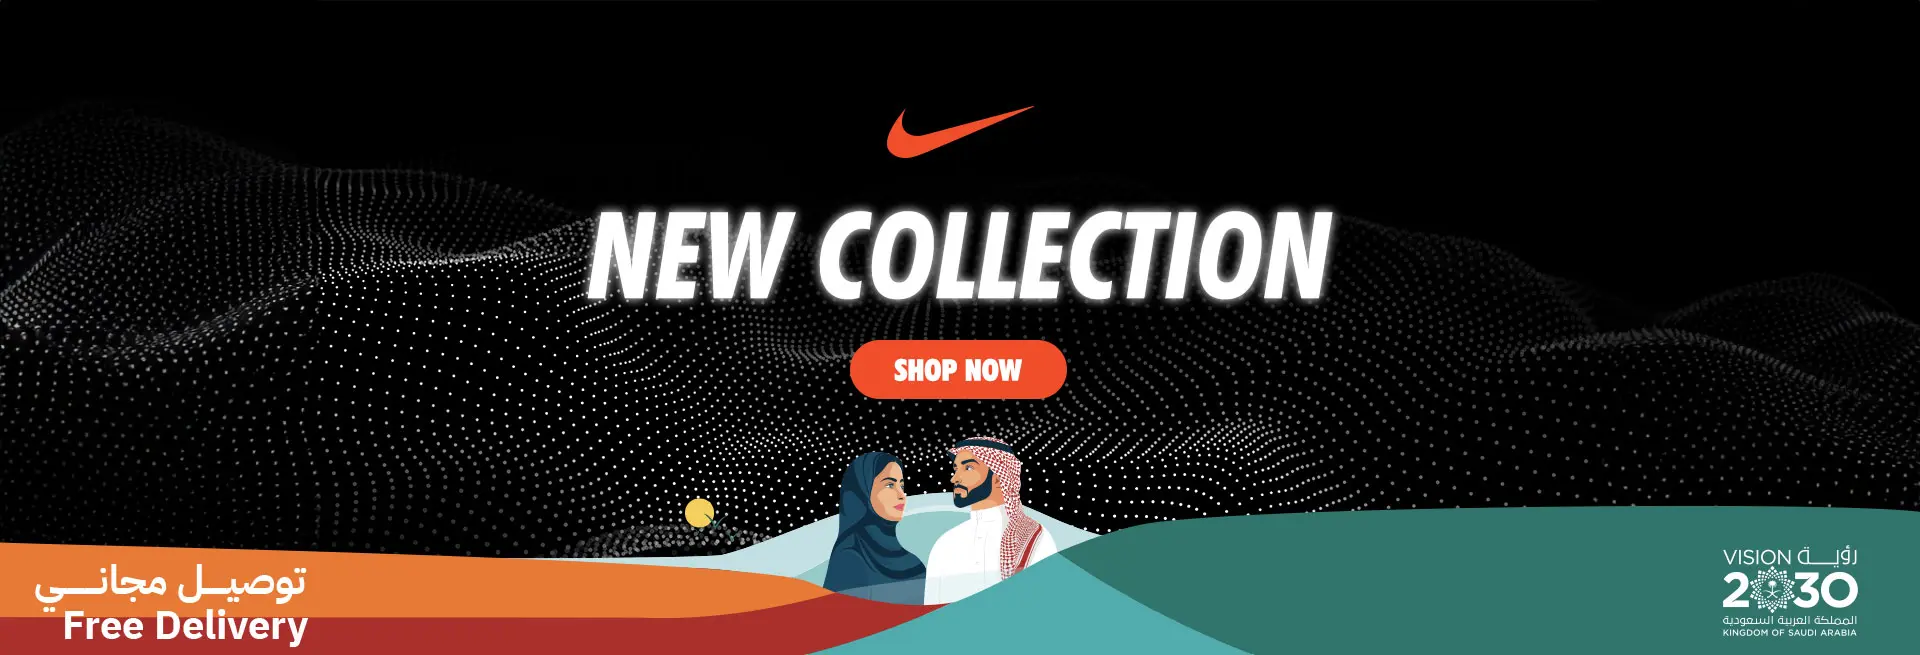 Nike - new collection